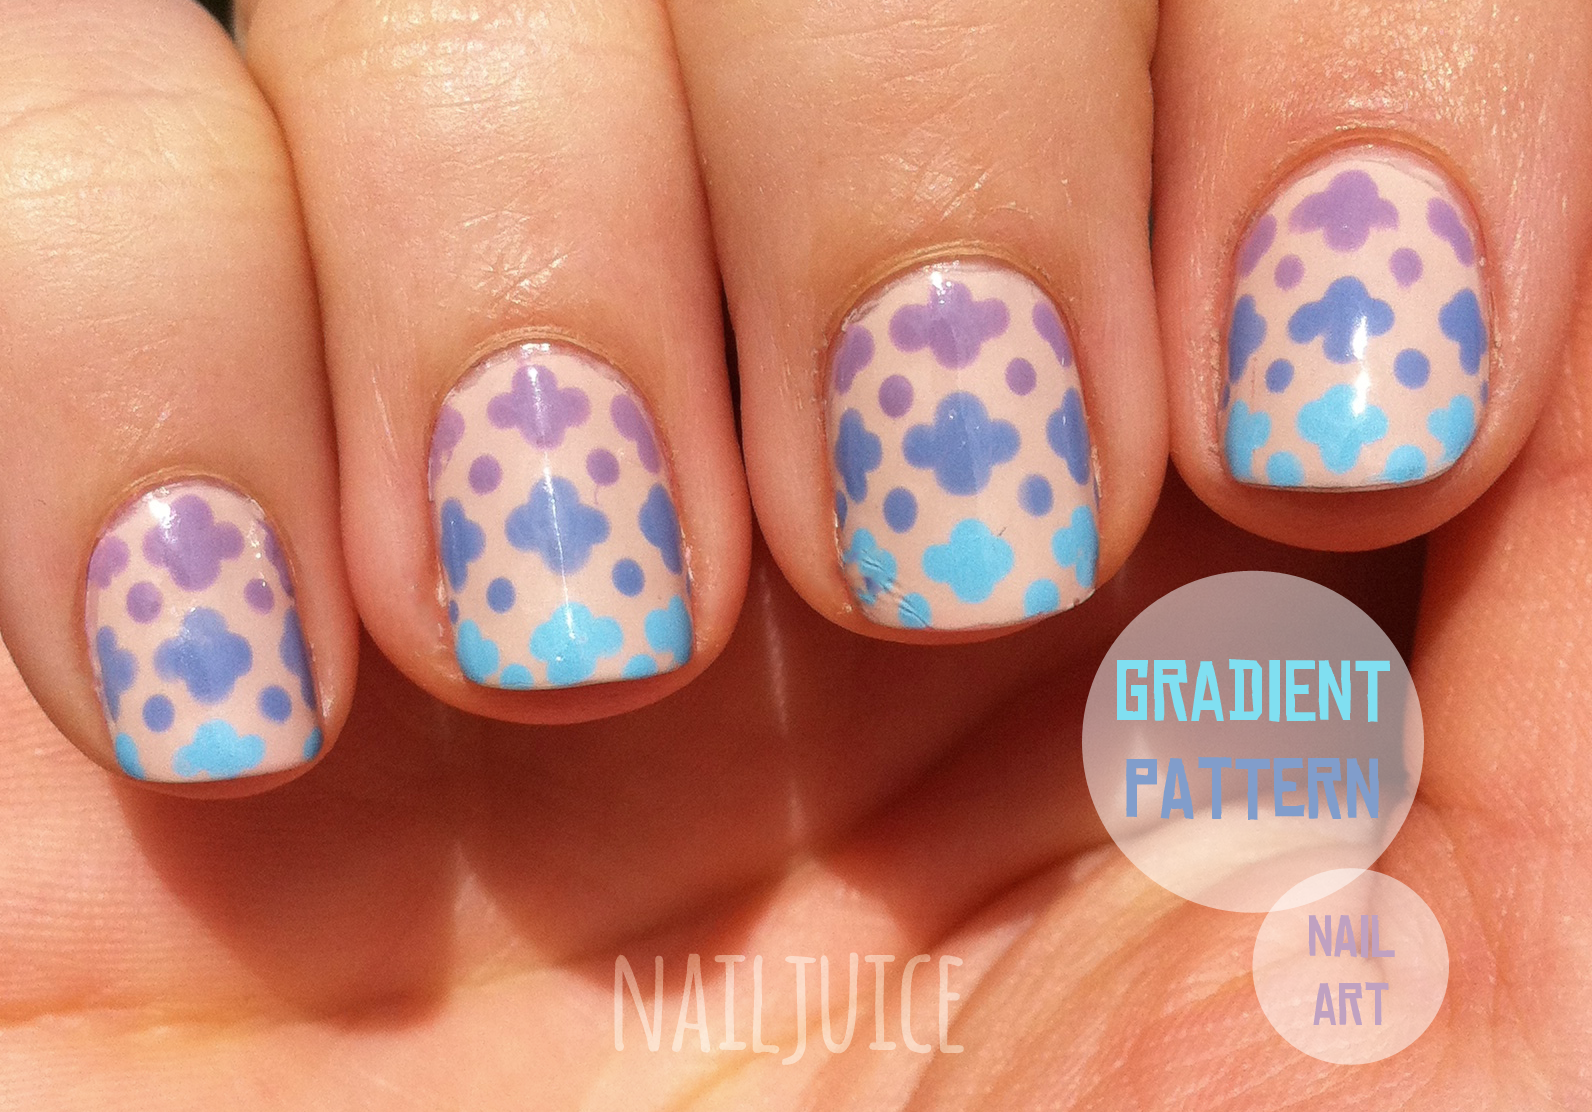 5. Top 5 Tools for Creating a Perfect Vertical Gradient Nail Art - wide 6